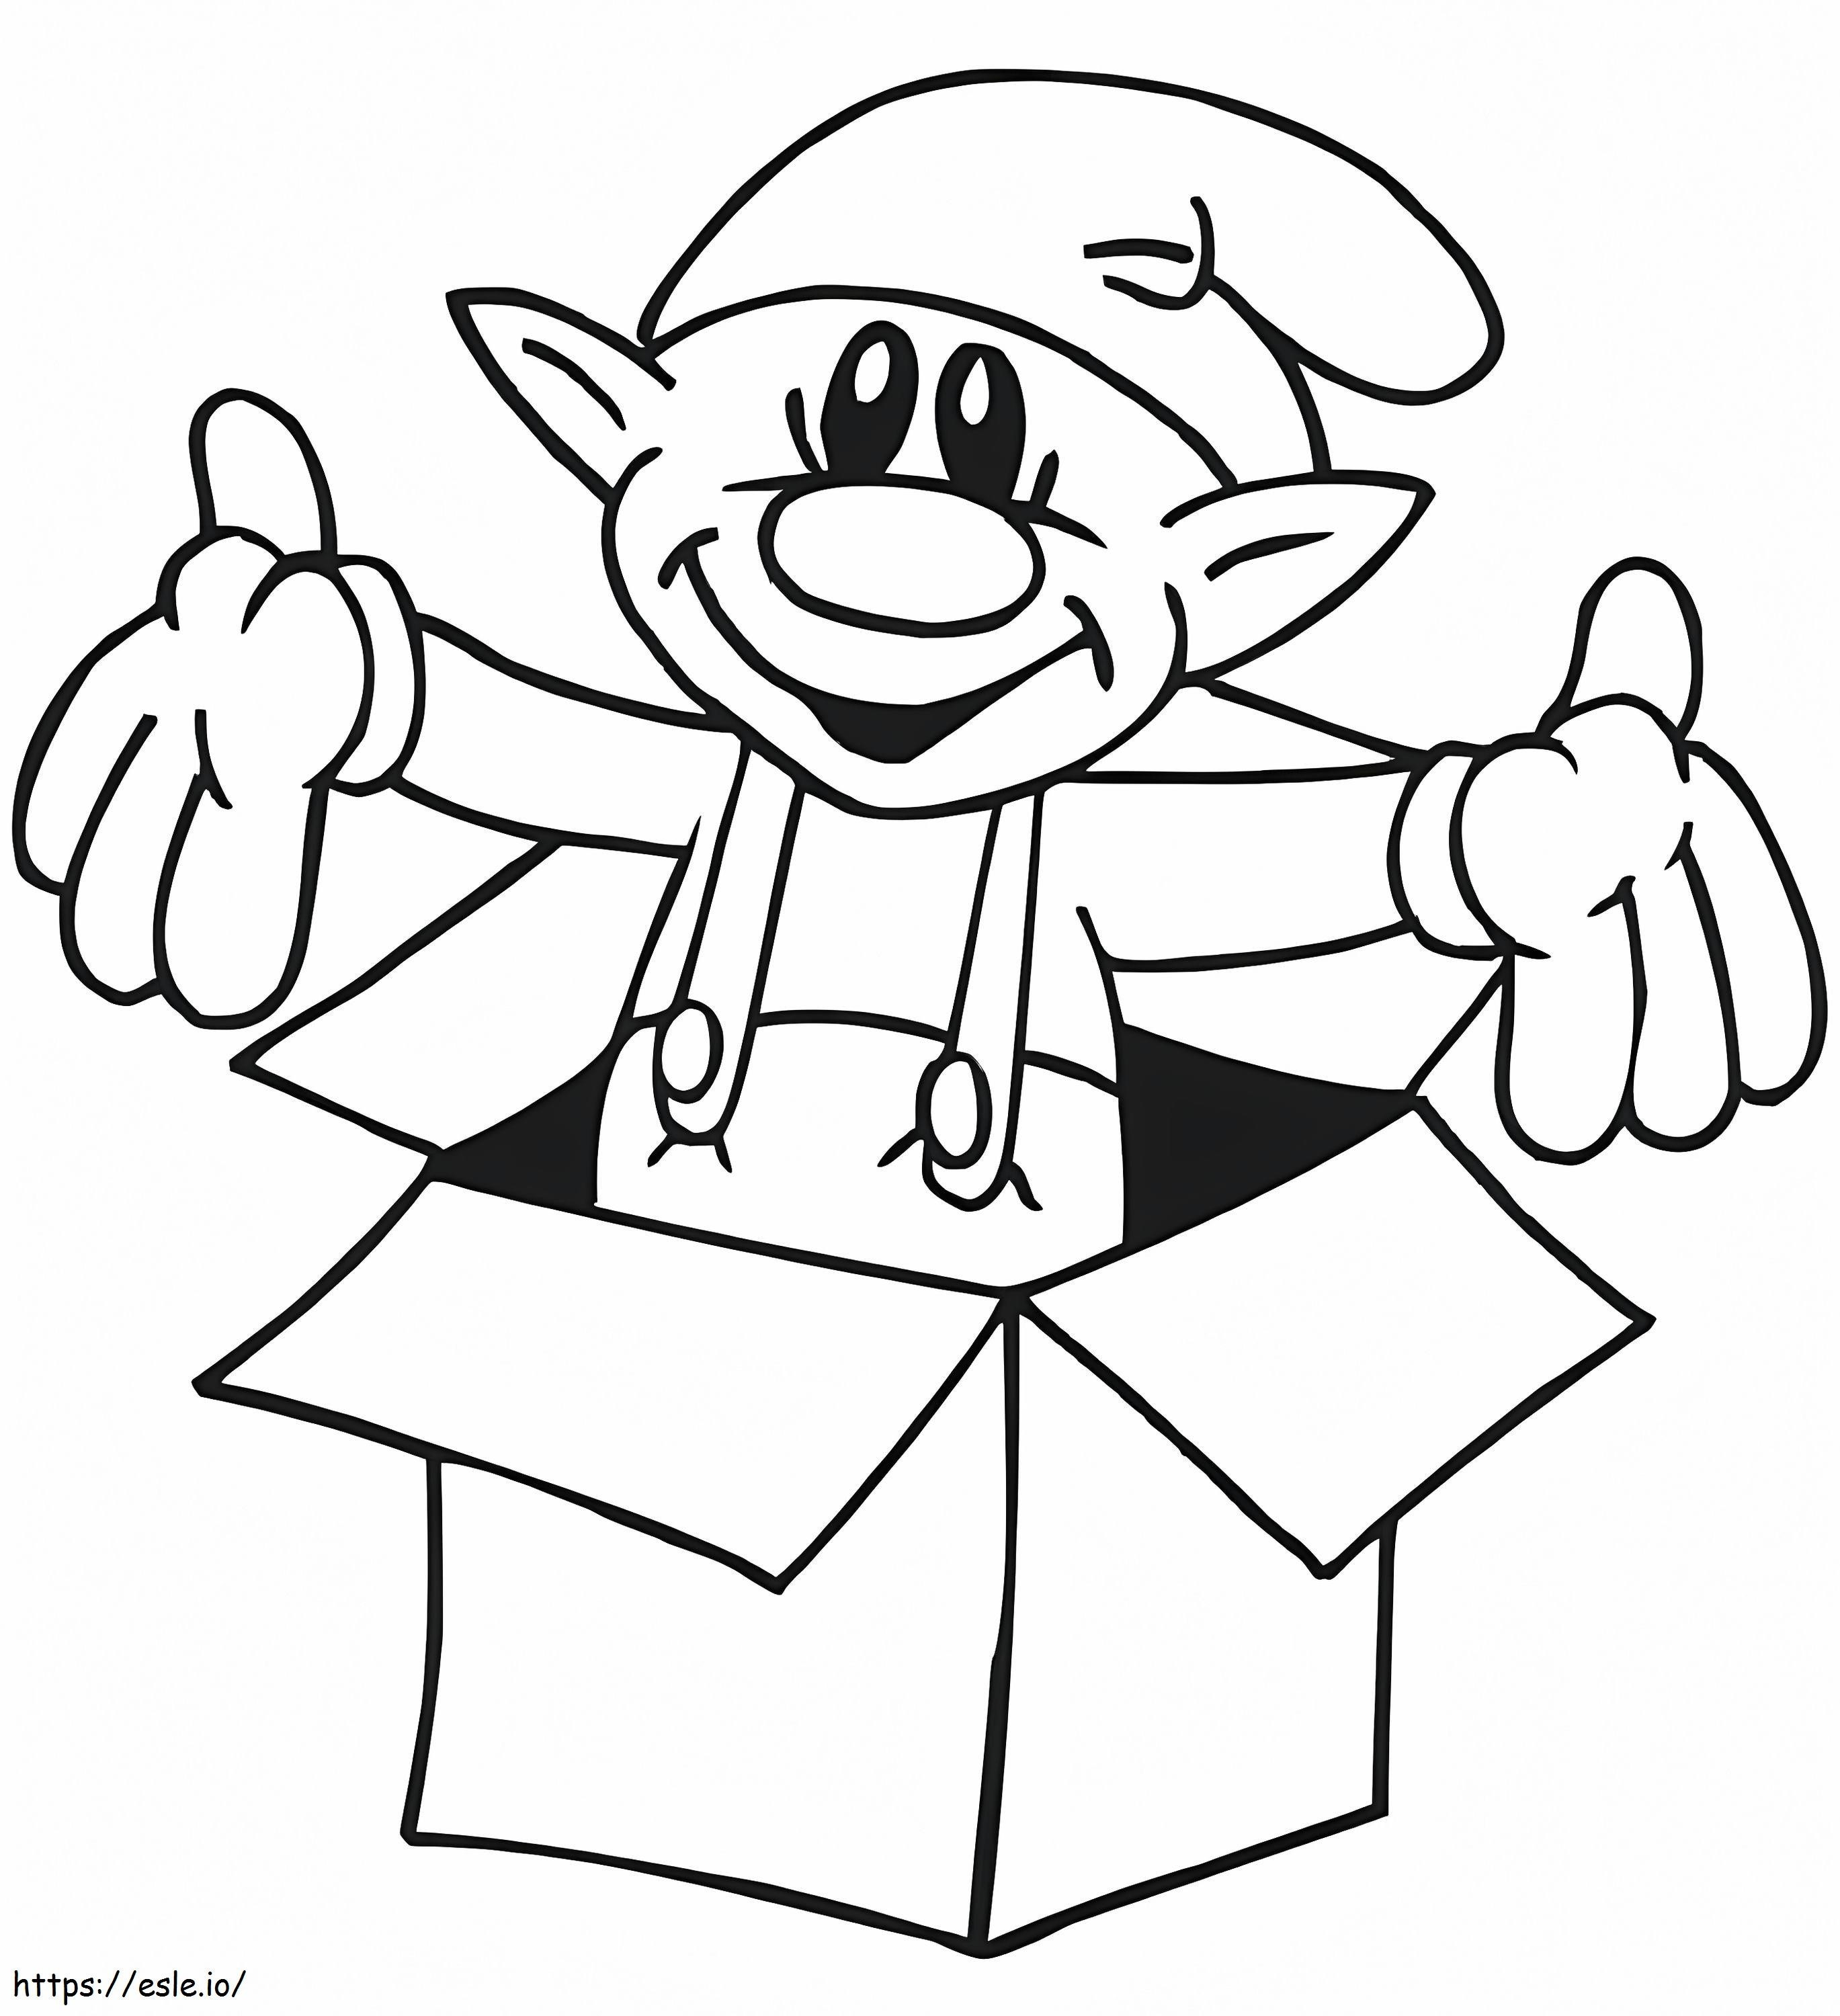 Elf In A Box coloring page